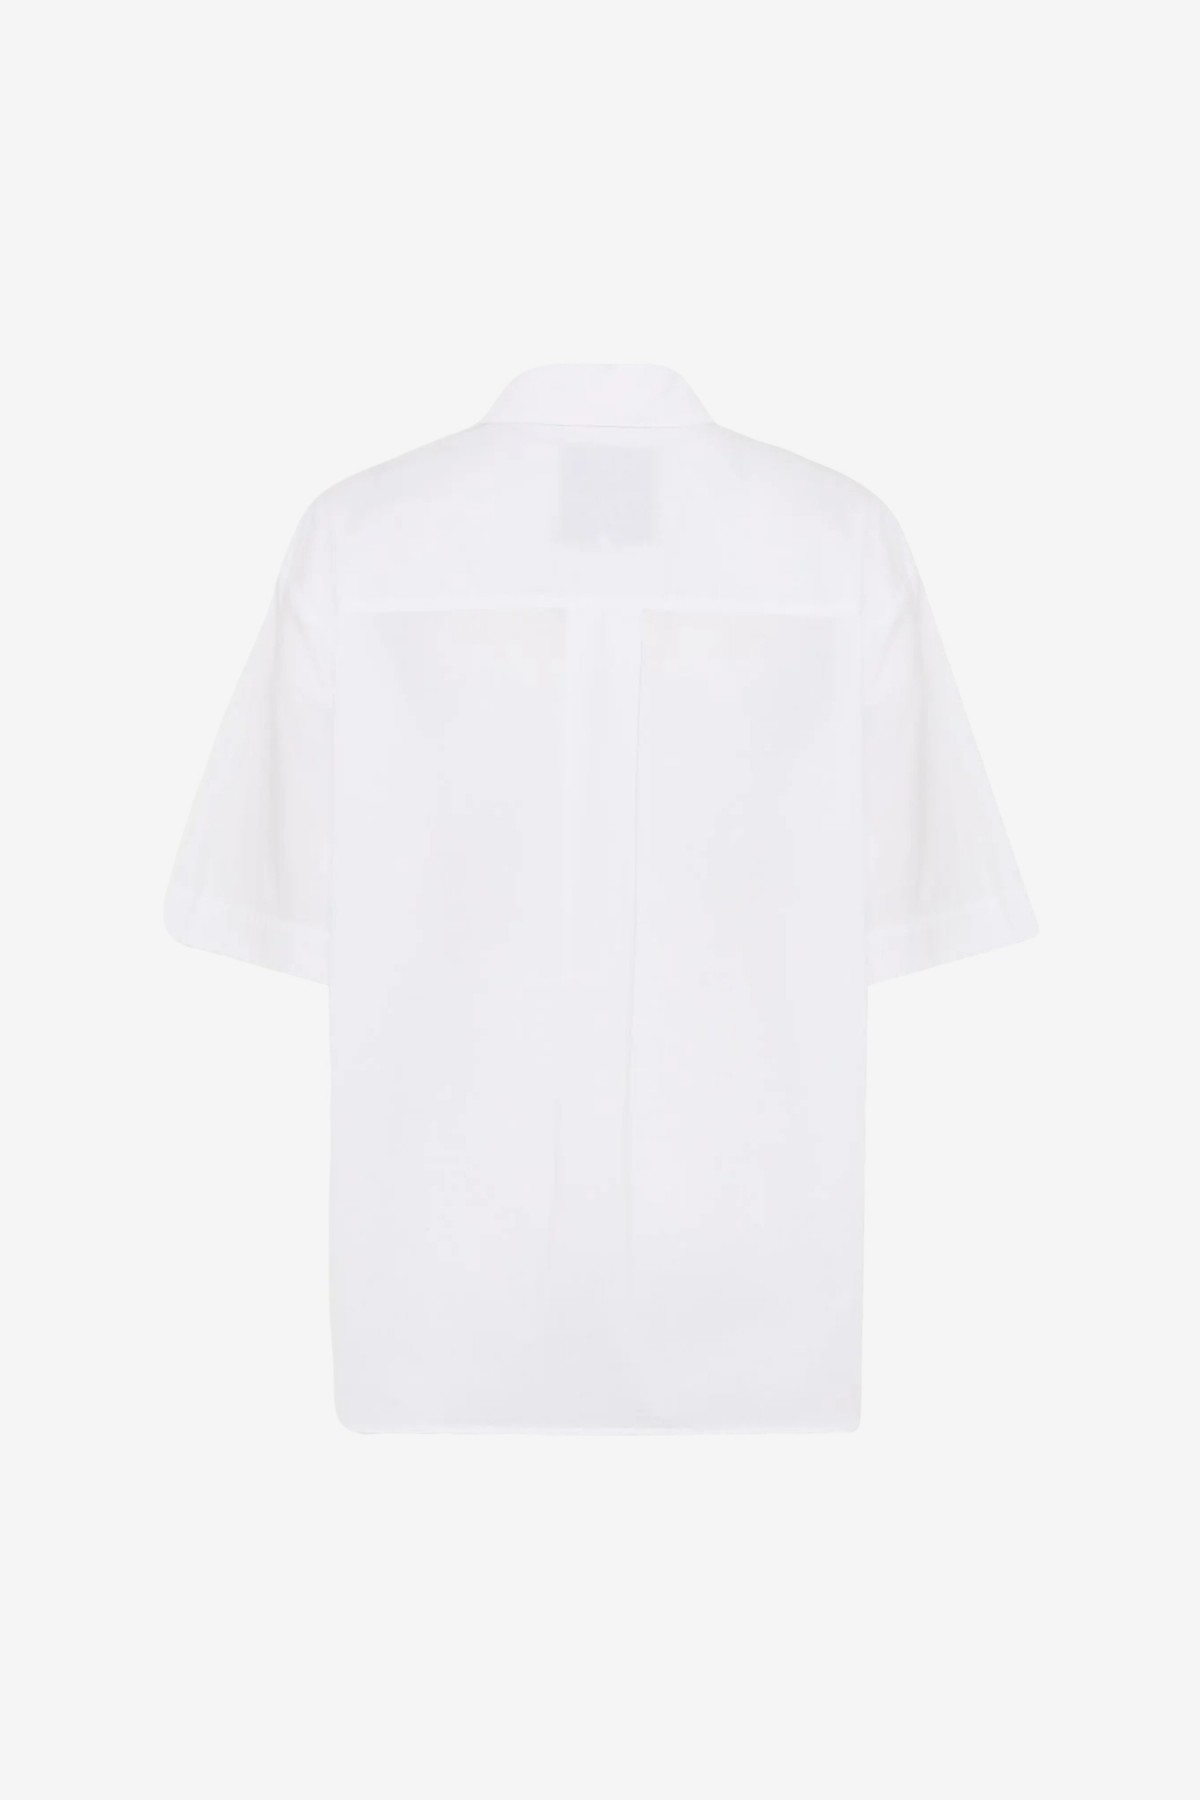 Herskind Helle Shirt in White